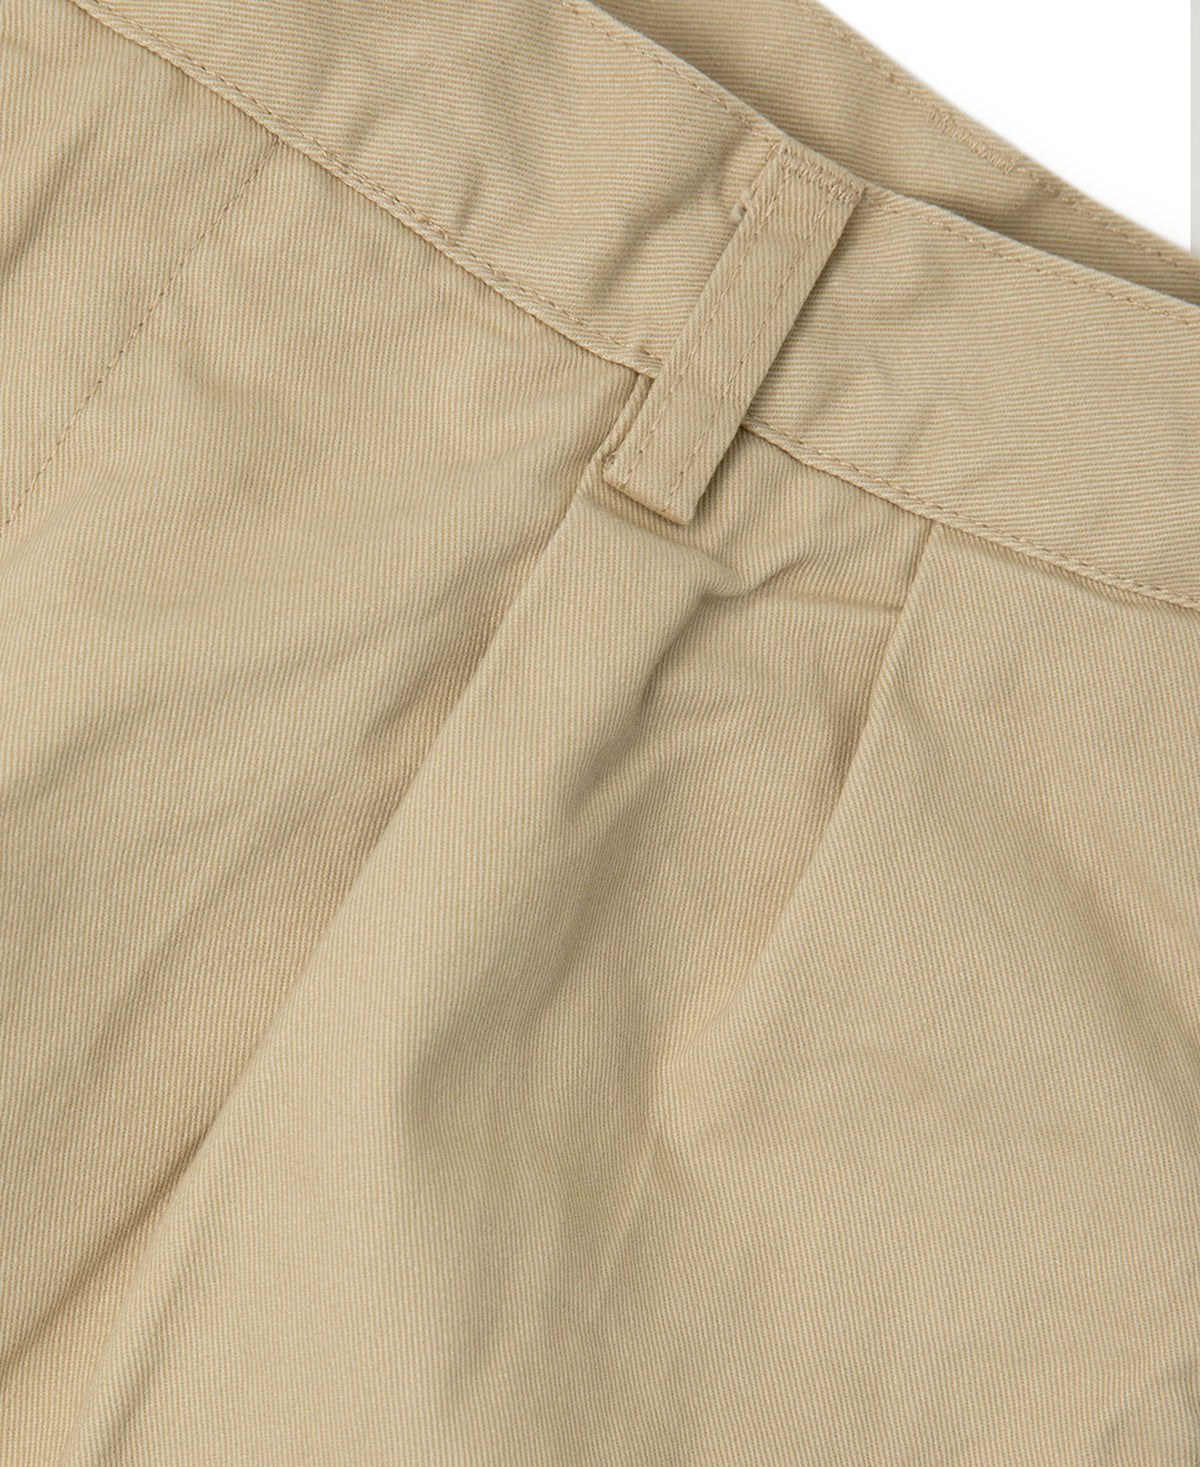 1930s IVY Style Double Pleated Chino Trousers - Khaki